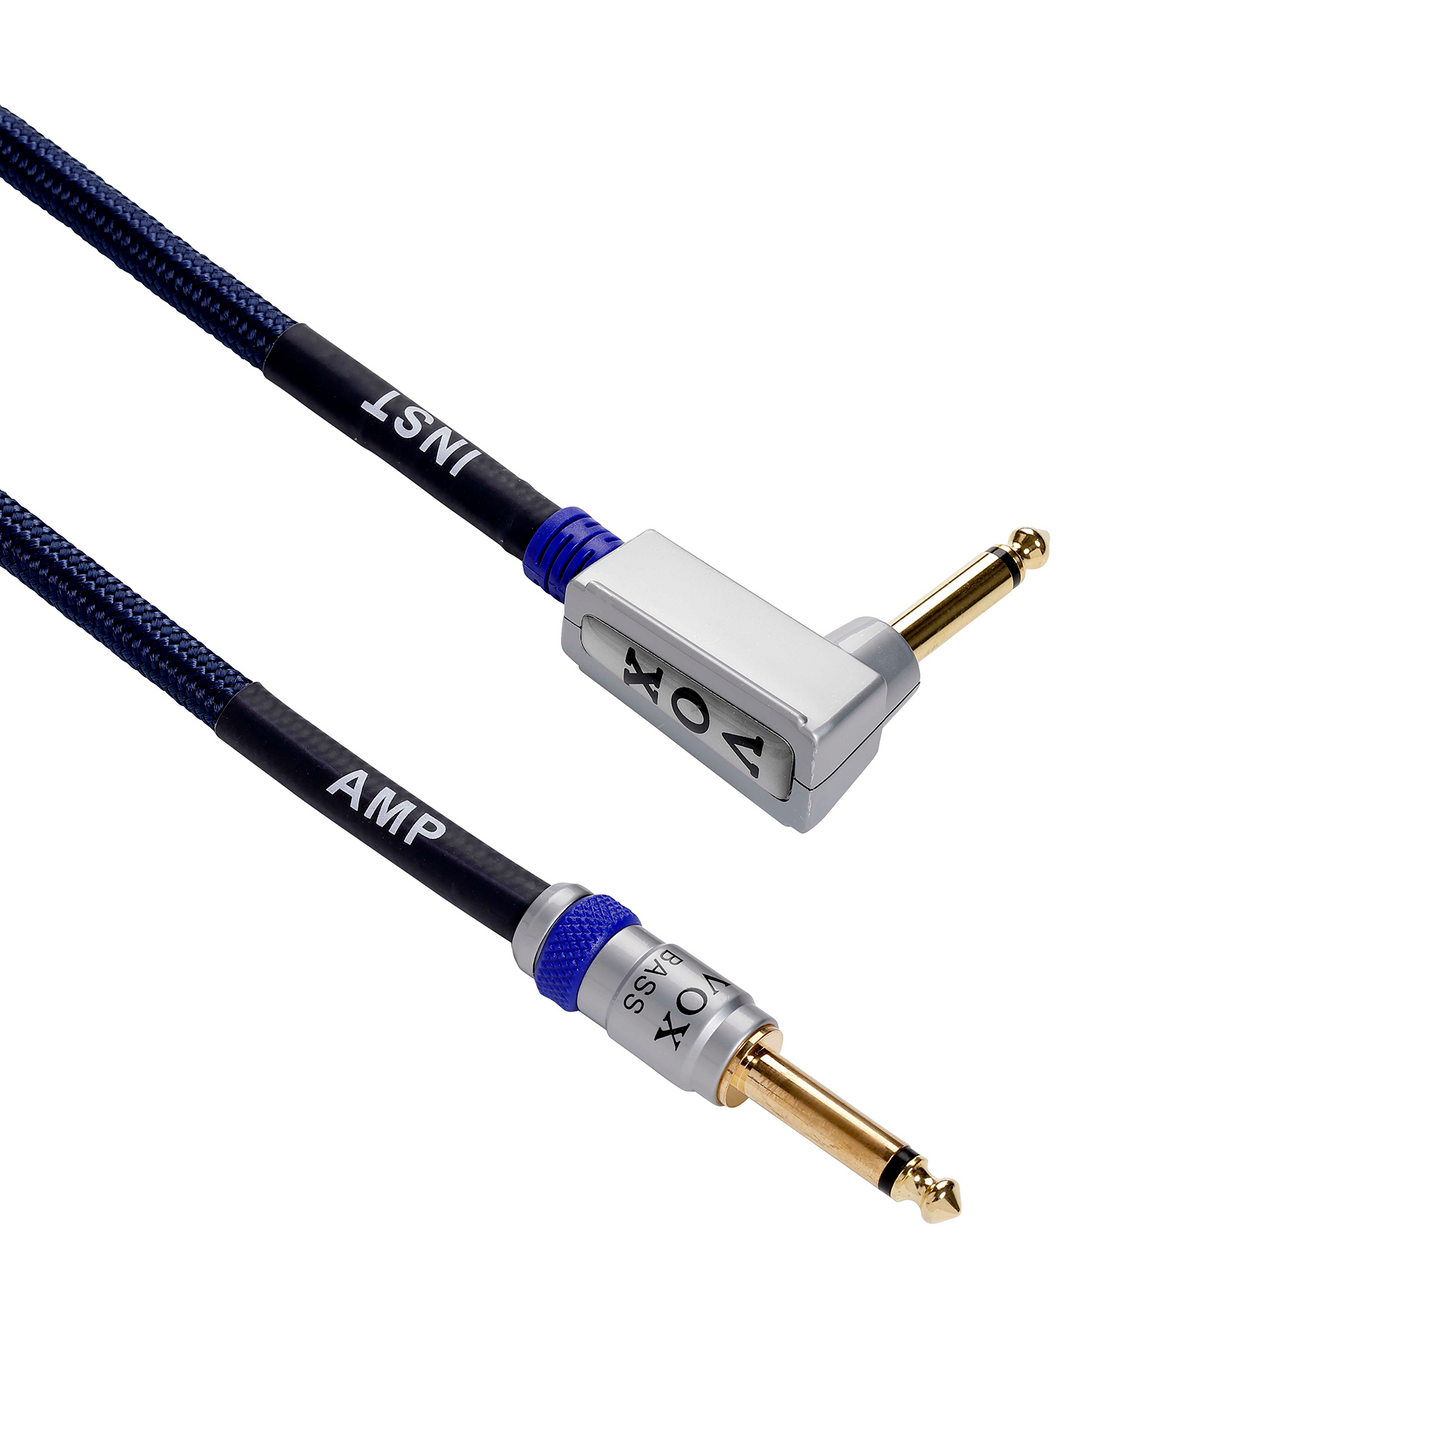 Vox Class A Bass Cable - 19,5ft (6 metros)